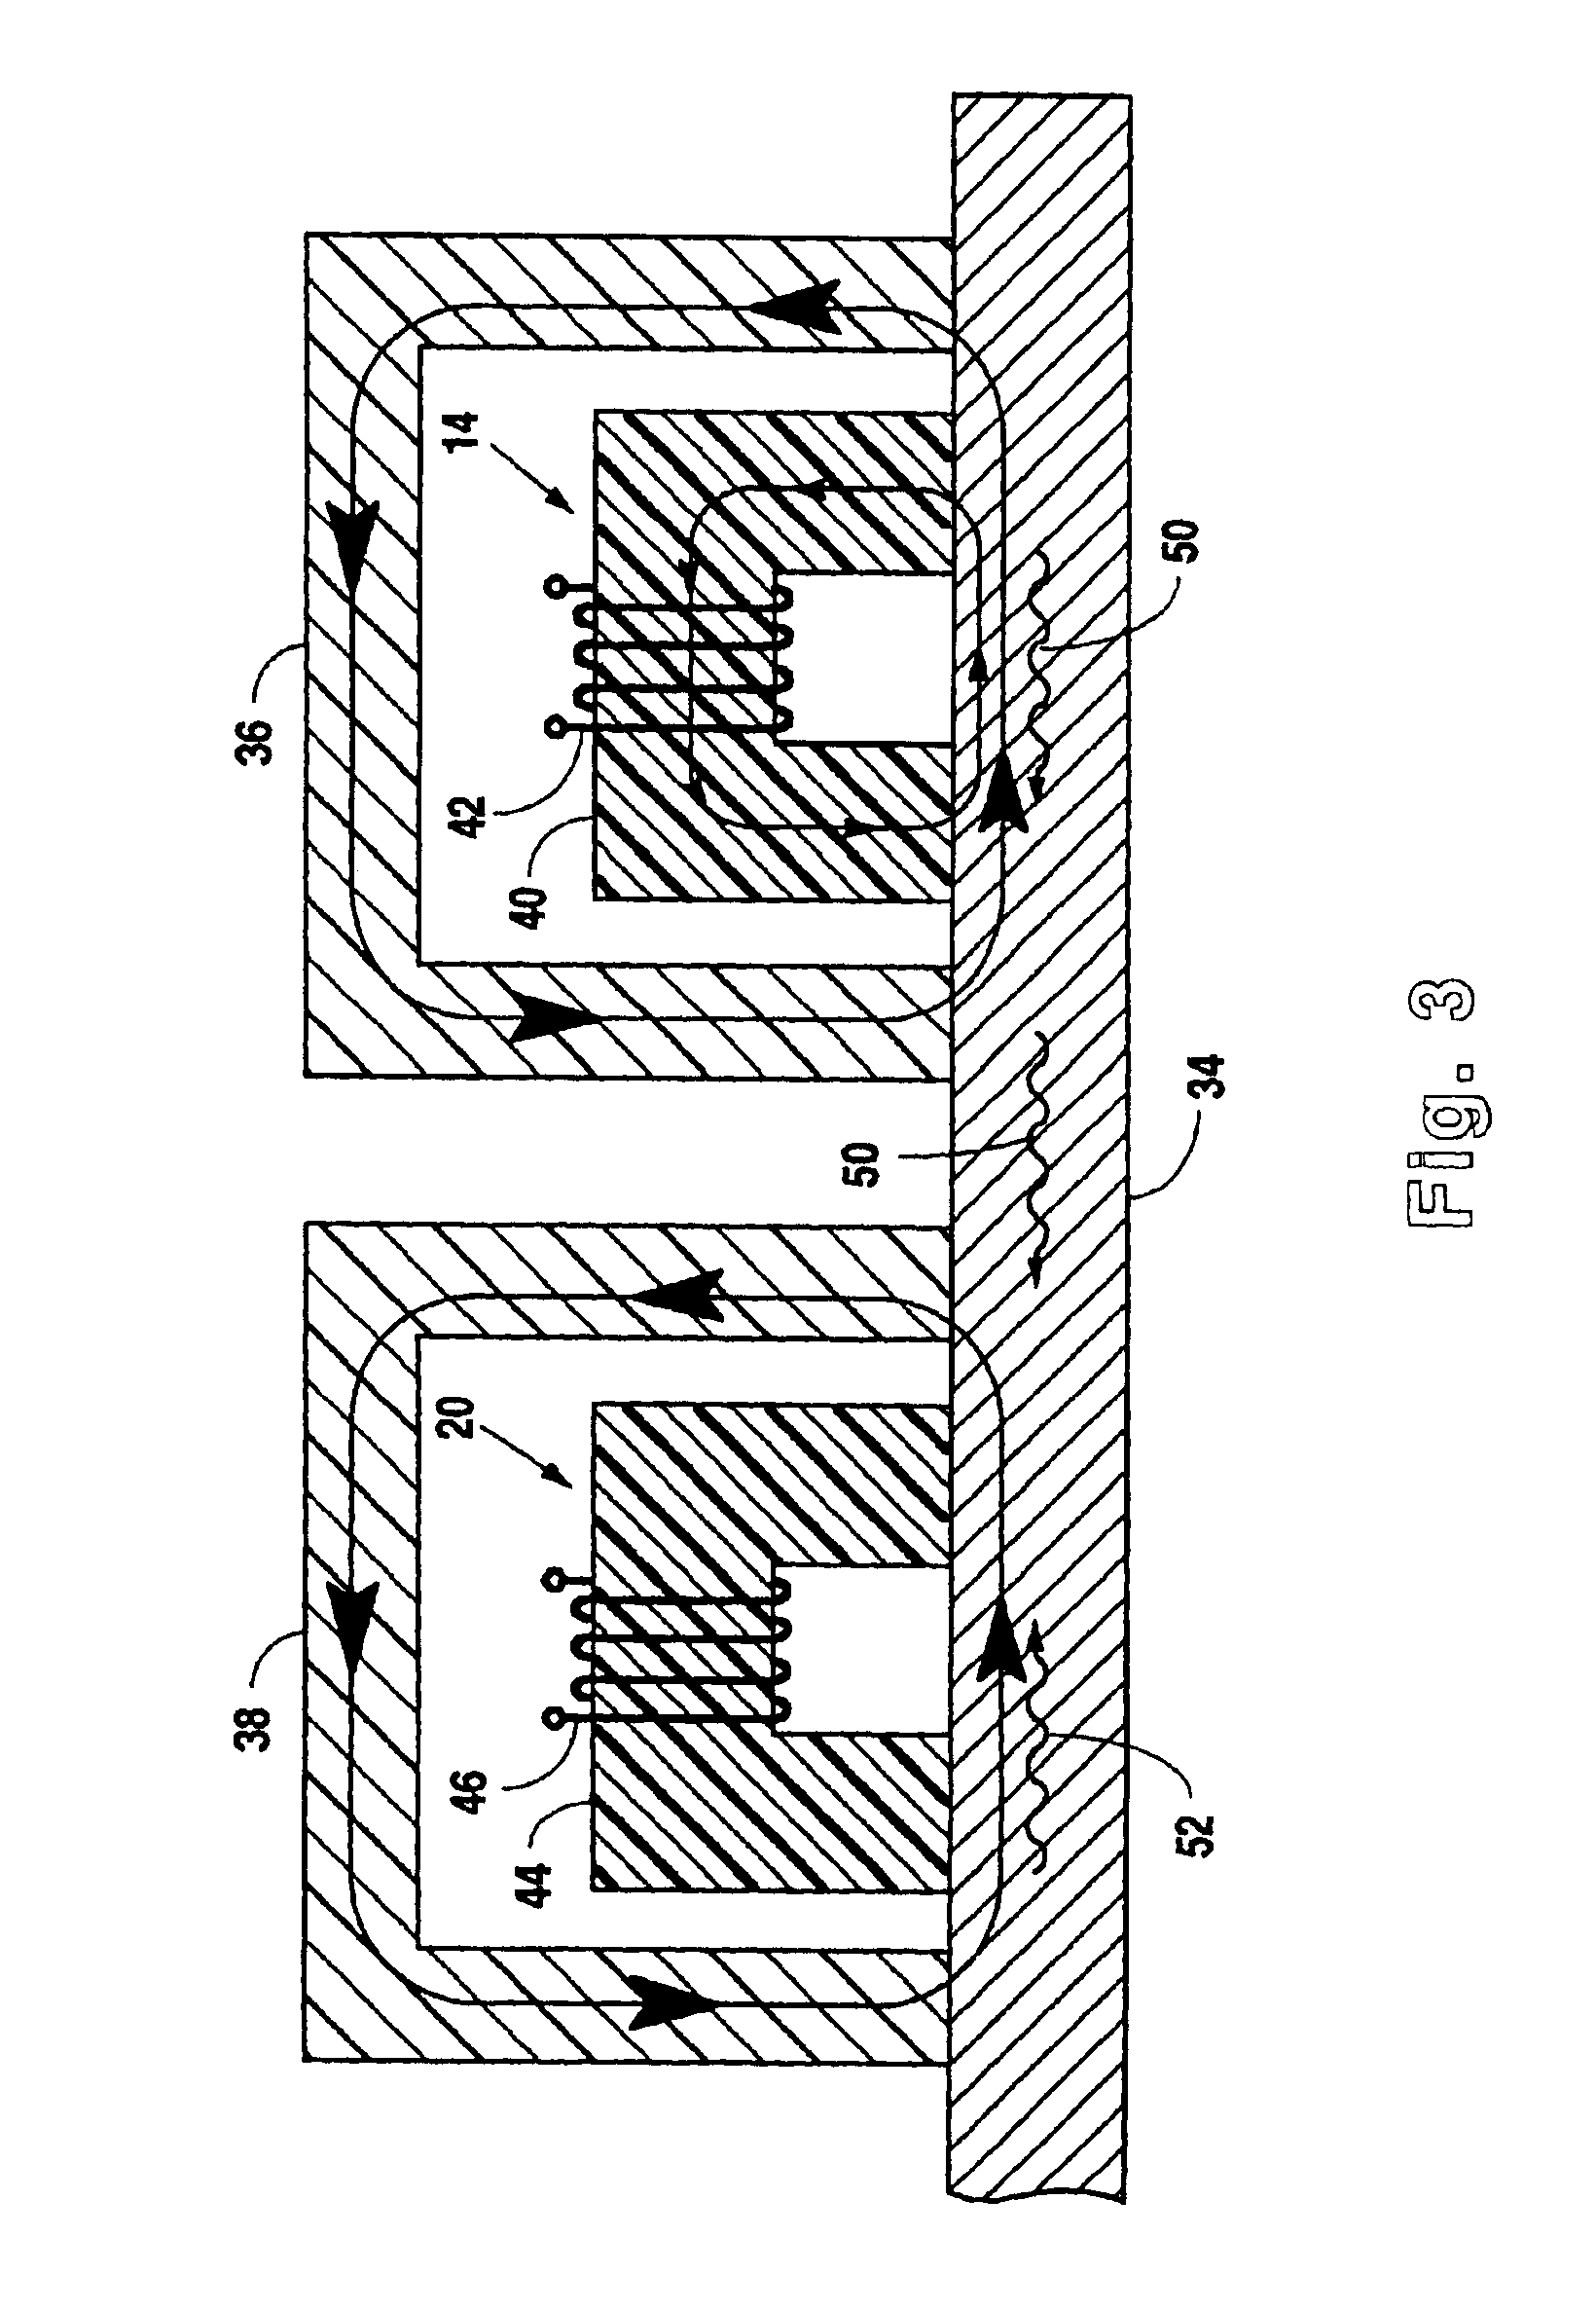 Method and apparatus generating and detecting torsional wave inspection of pipes or tubes